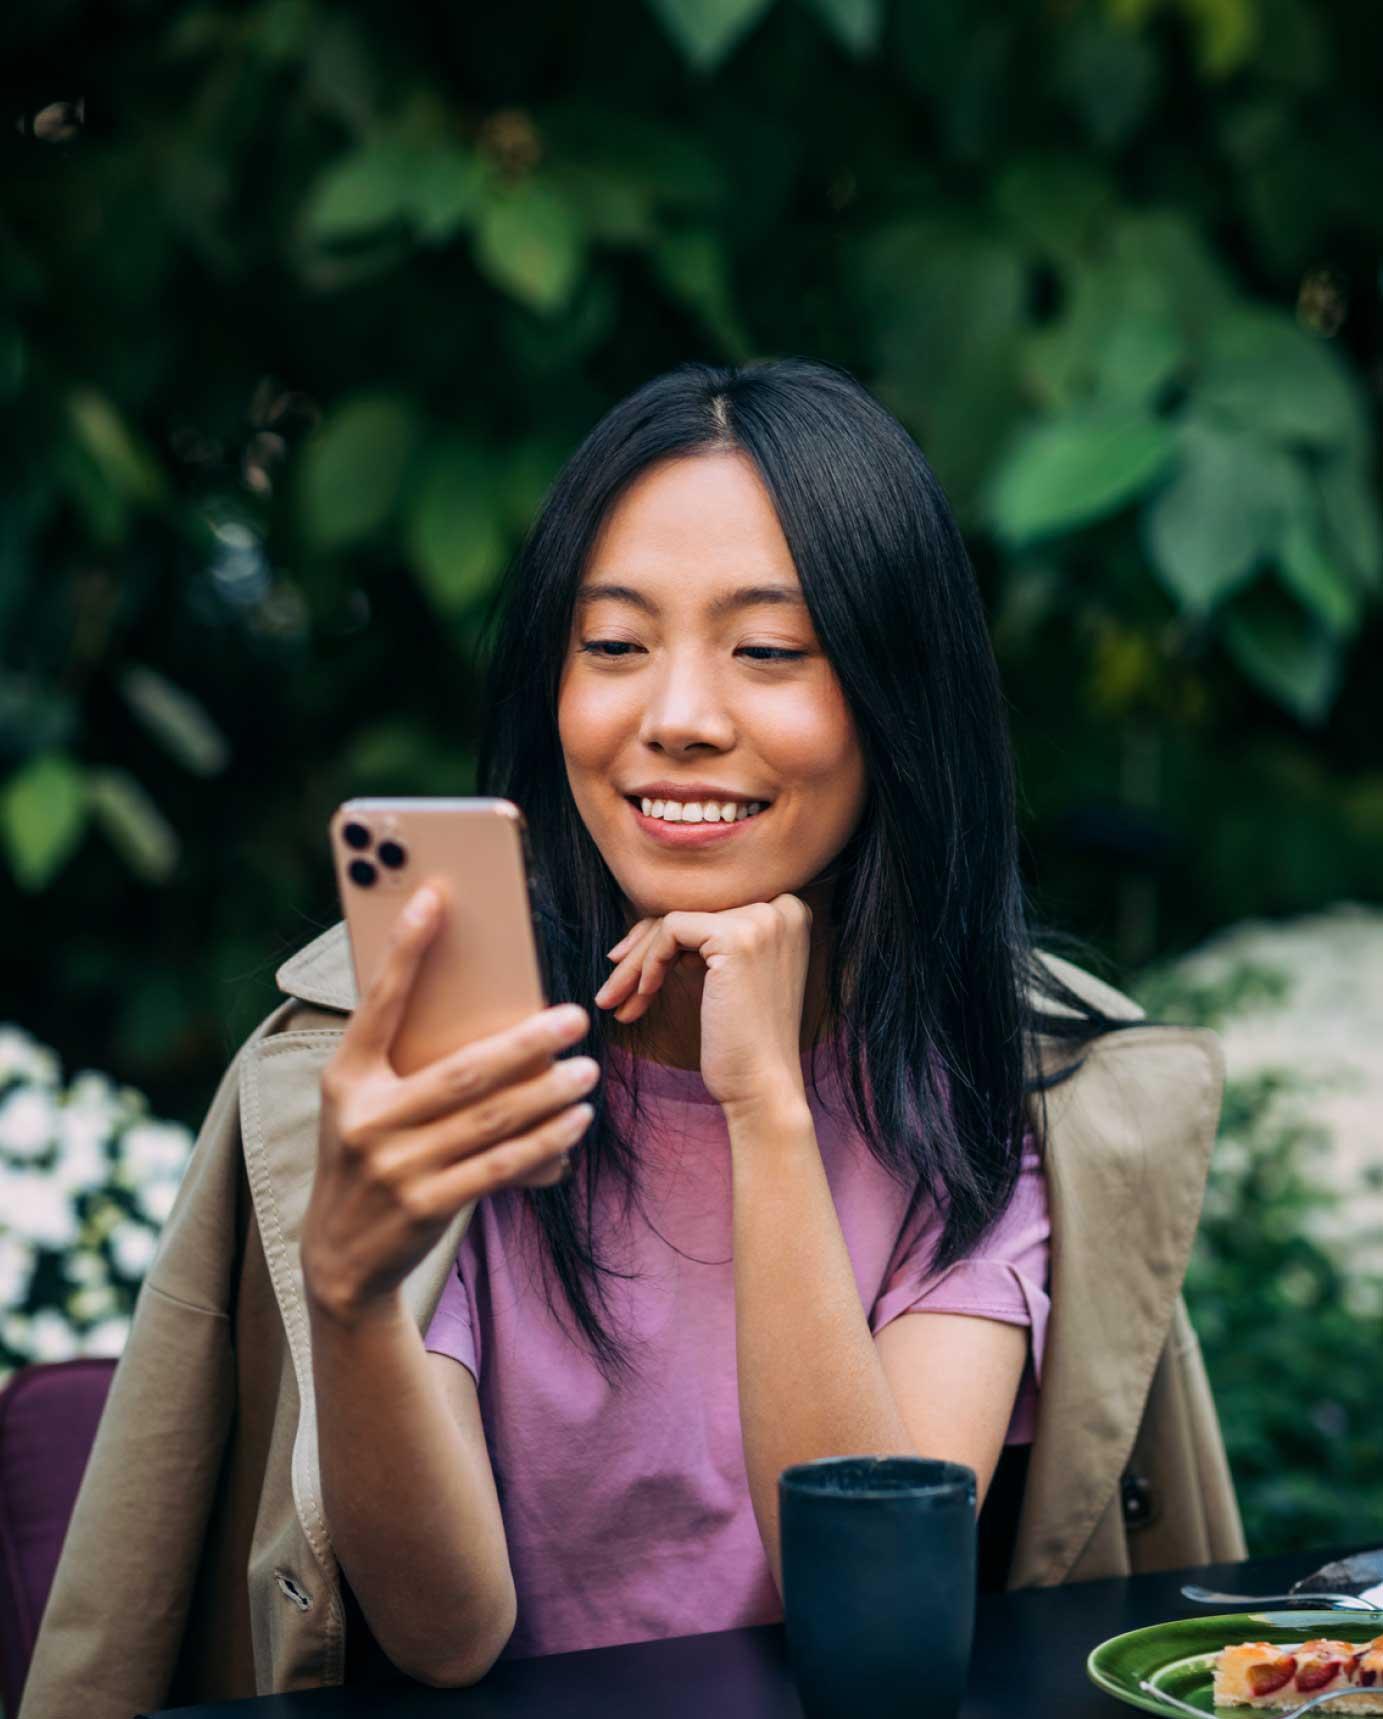 woman sitting at garden patio table smiling and looking at smart phone